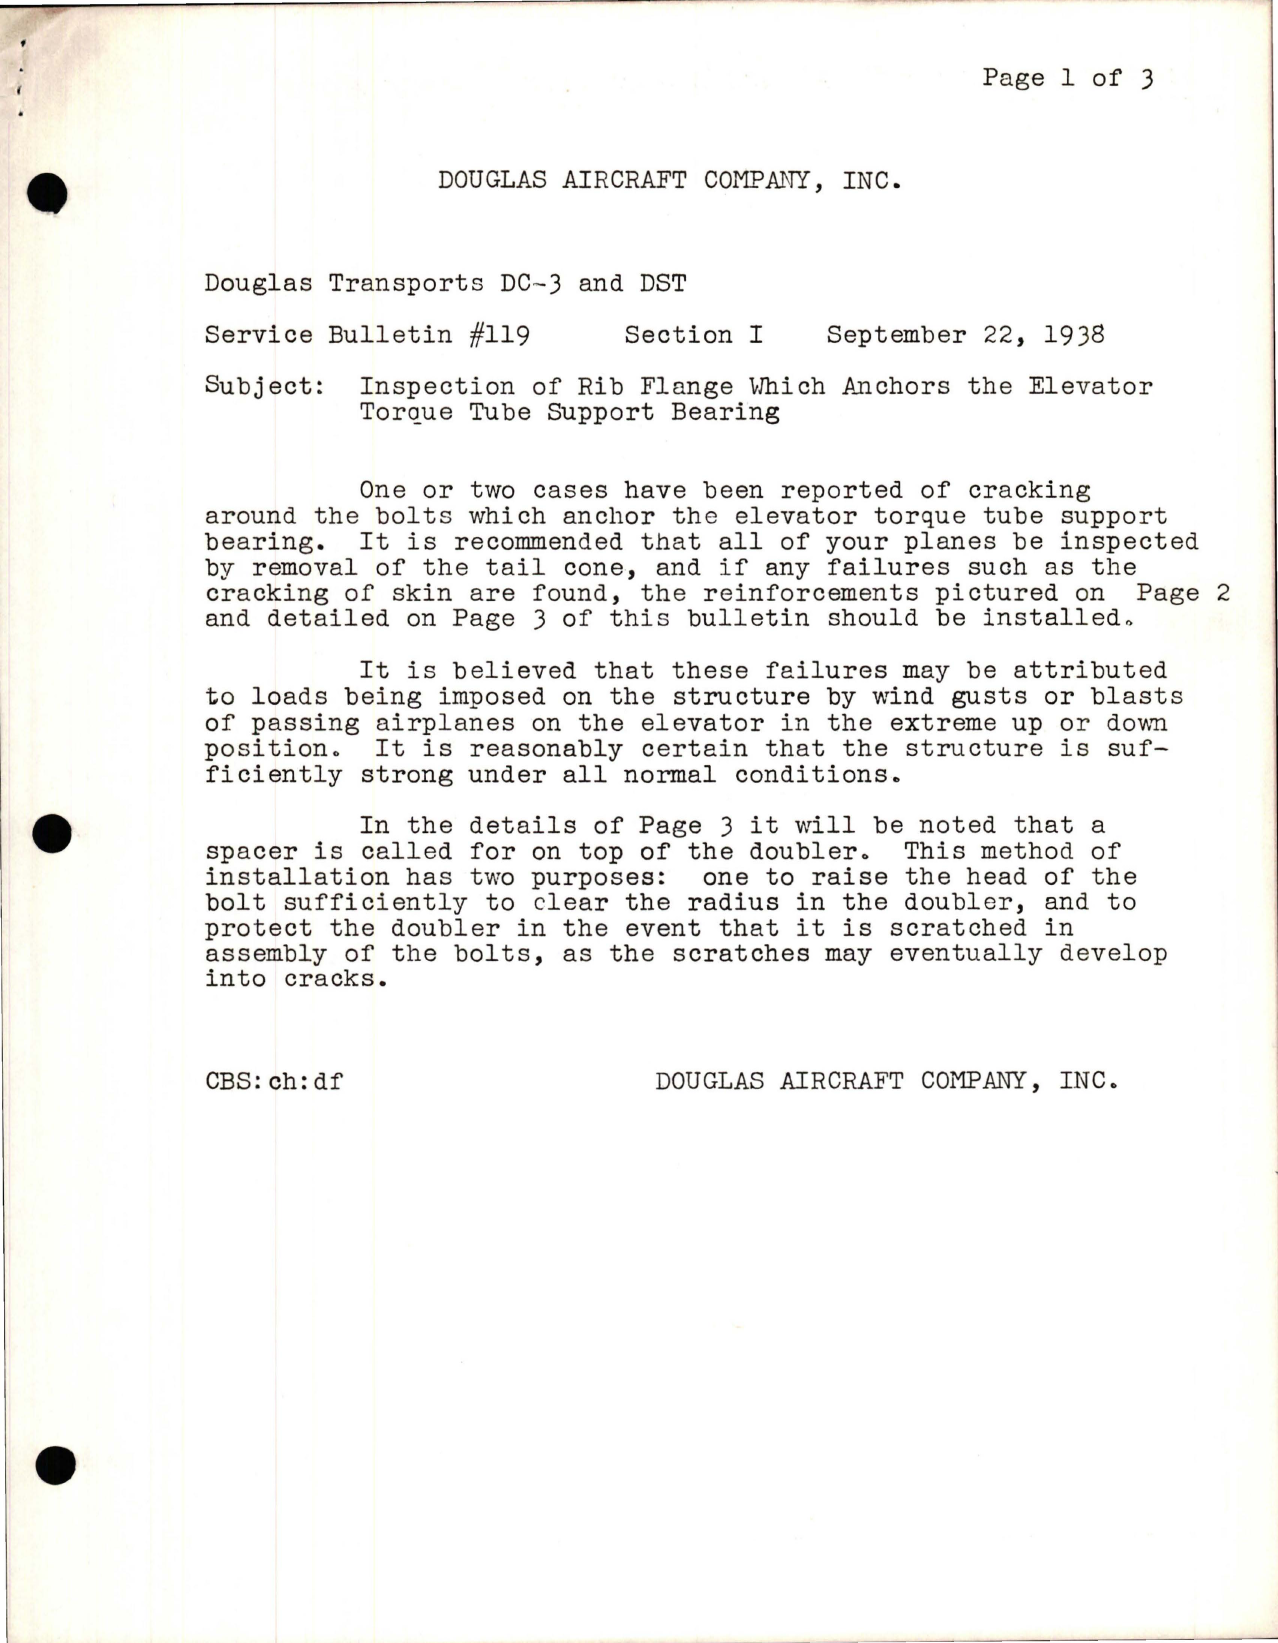 Sample page 1 from AirCorps Library document: Inspection of Rib Flange which Anchors the Elevator Torque Tube Support Bearing